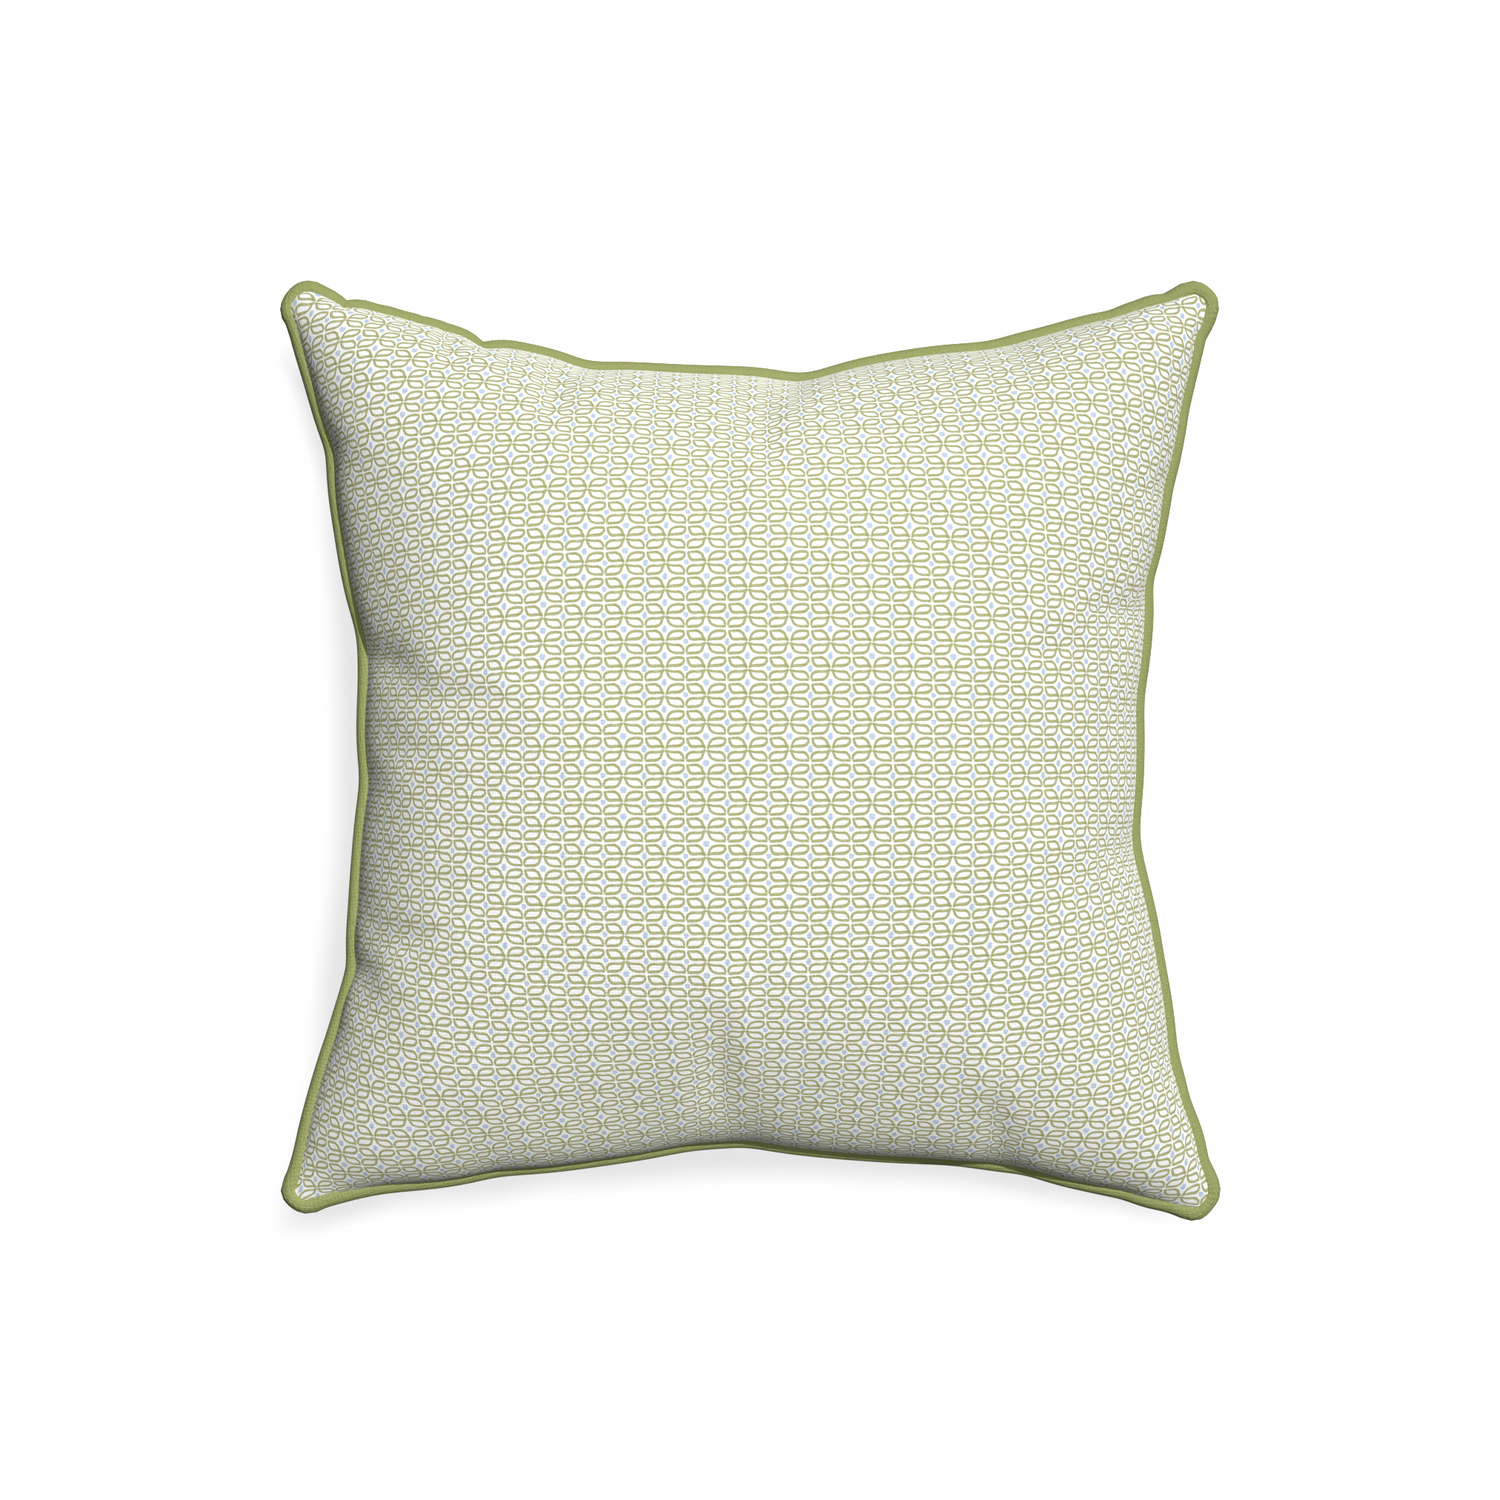 20-square loomi moss custom moss green geometricpillow with moss piping on white background